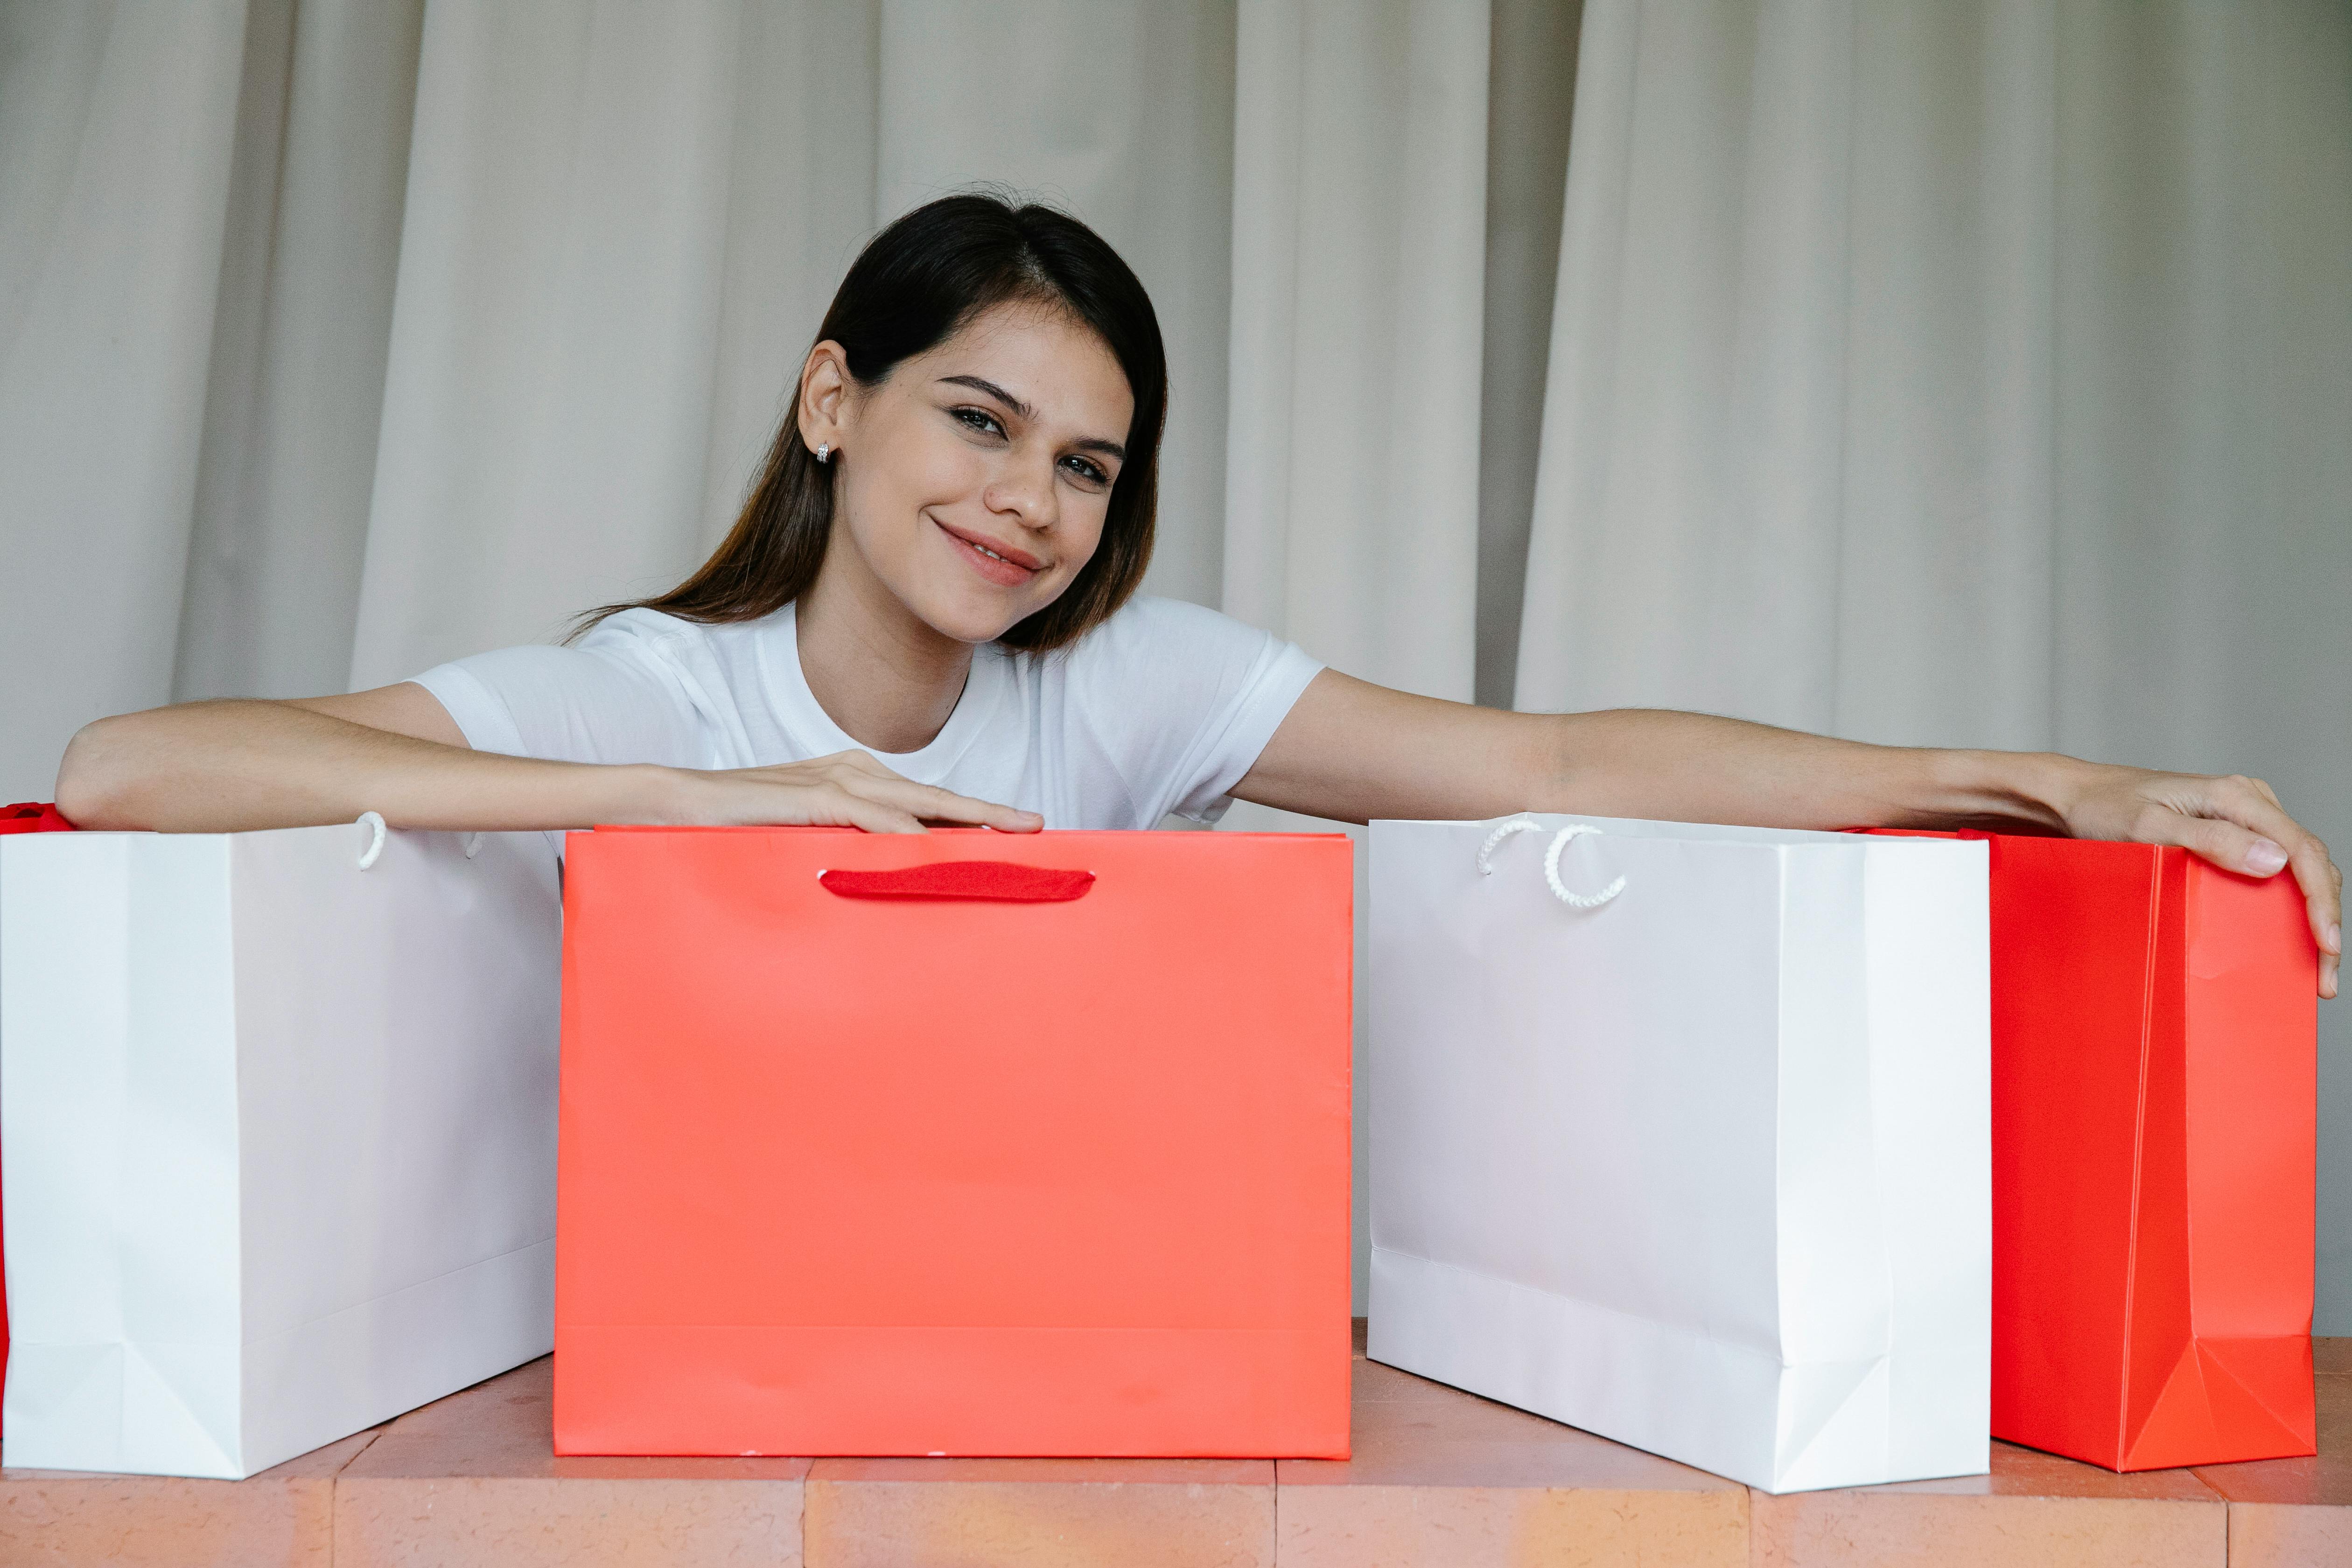 delighted young woman showing purchases in paper bags and smiling